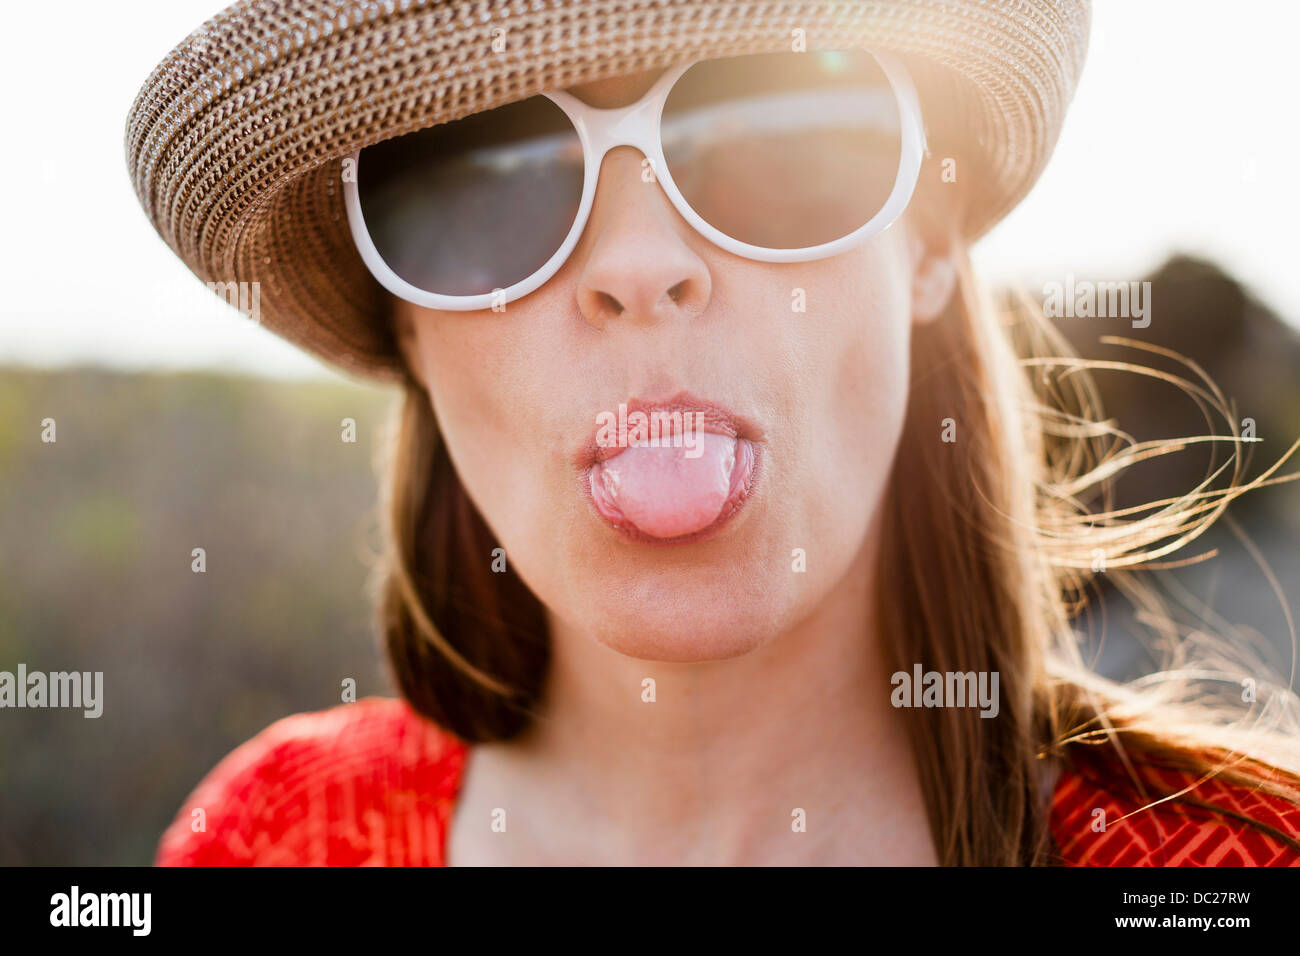 Mature woman wearing sunglasses and sunhat sticking out tongue Stock Photo